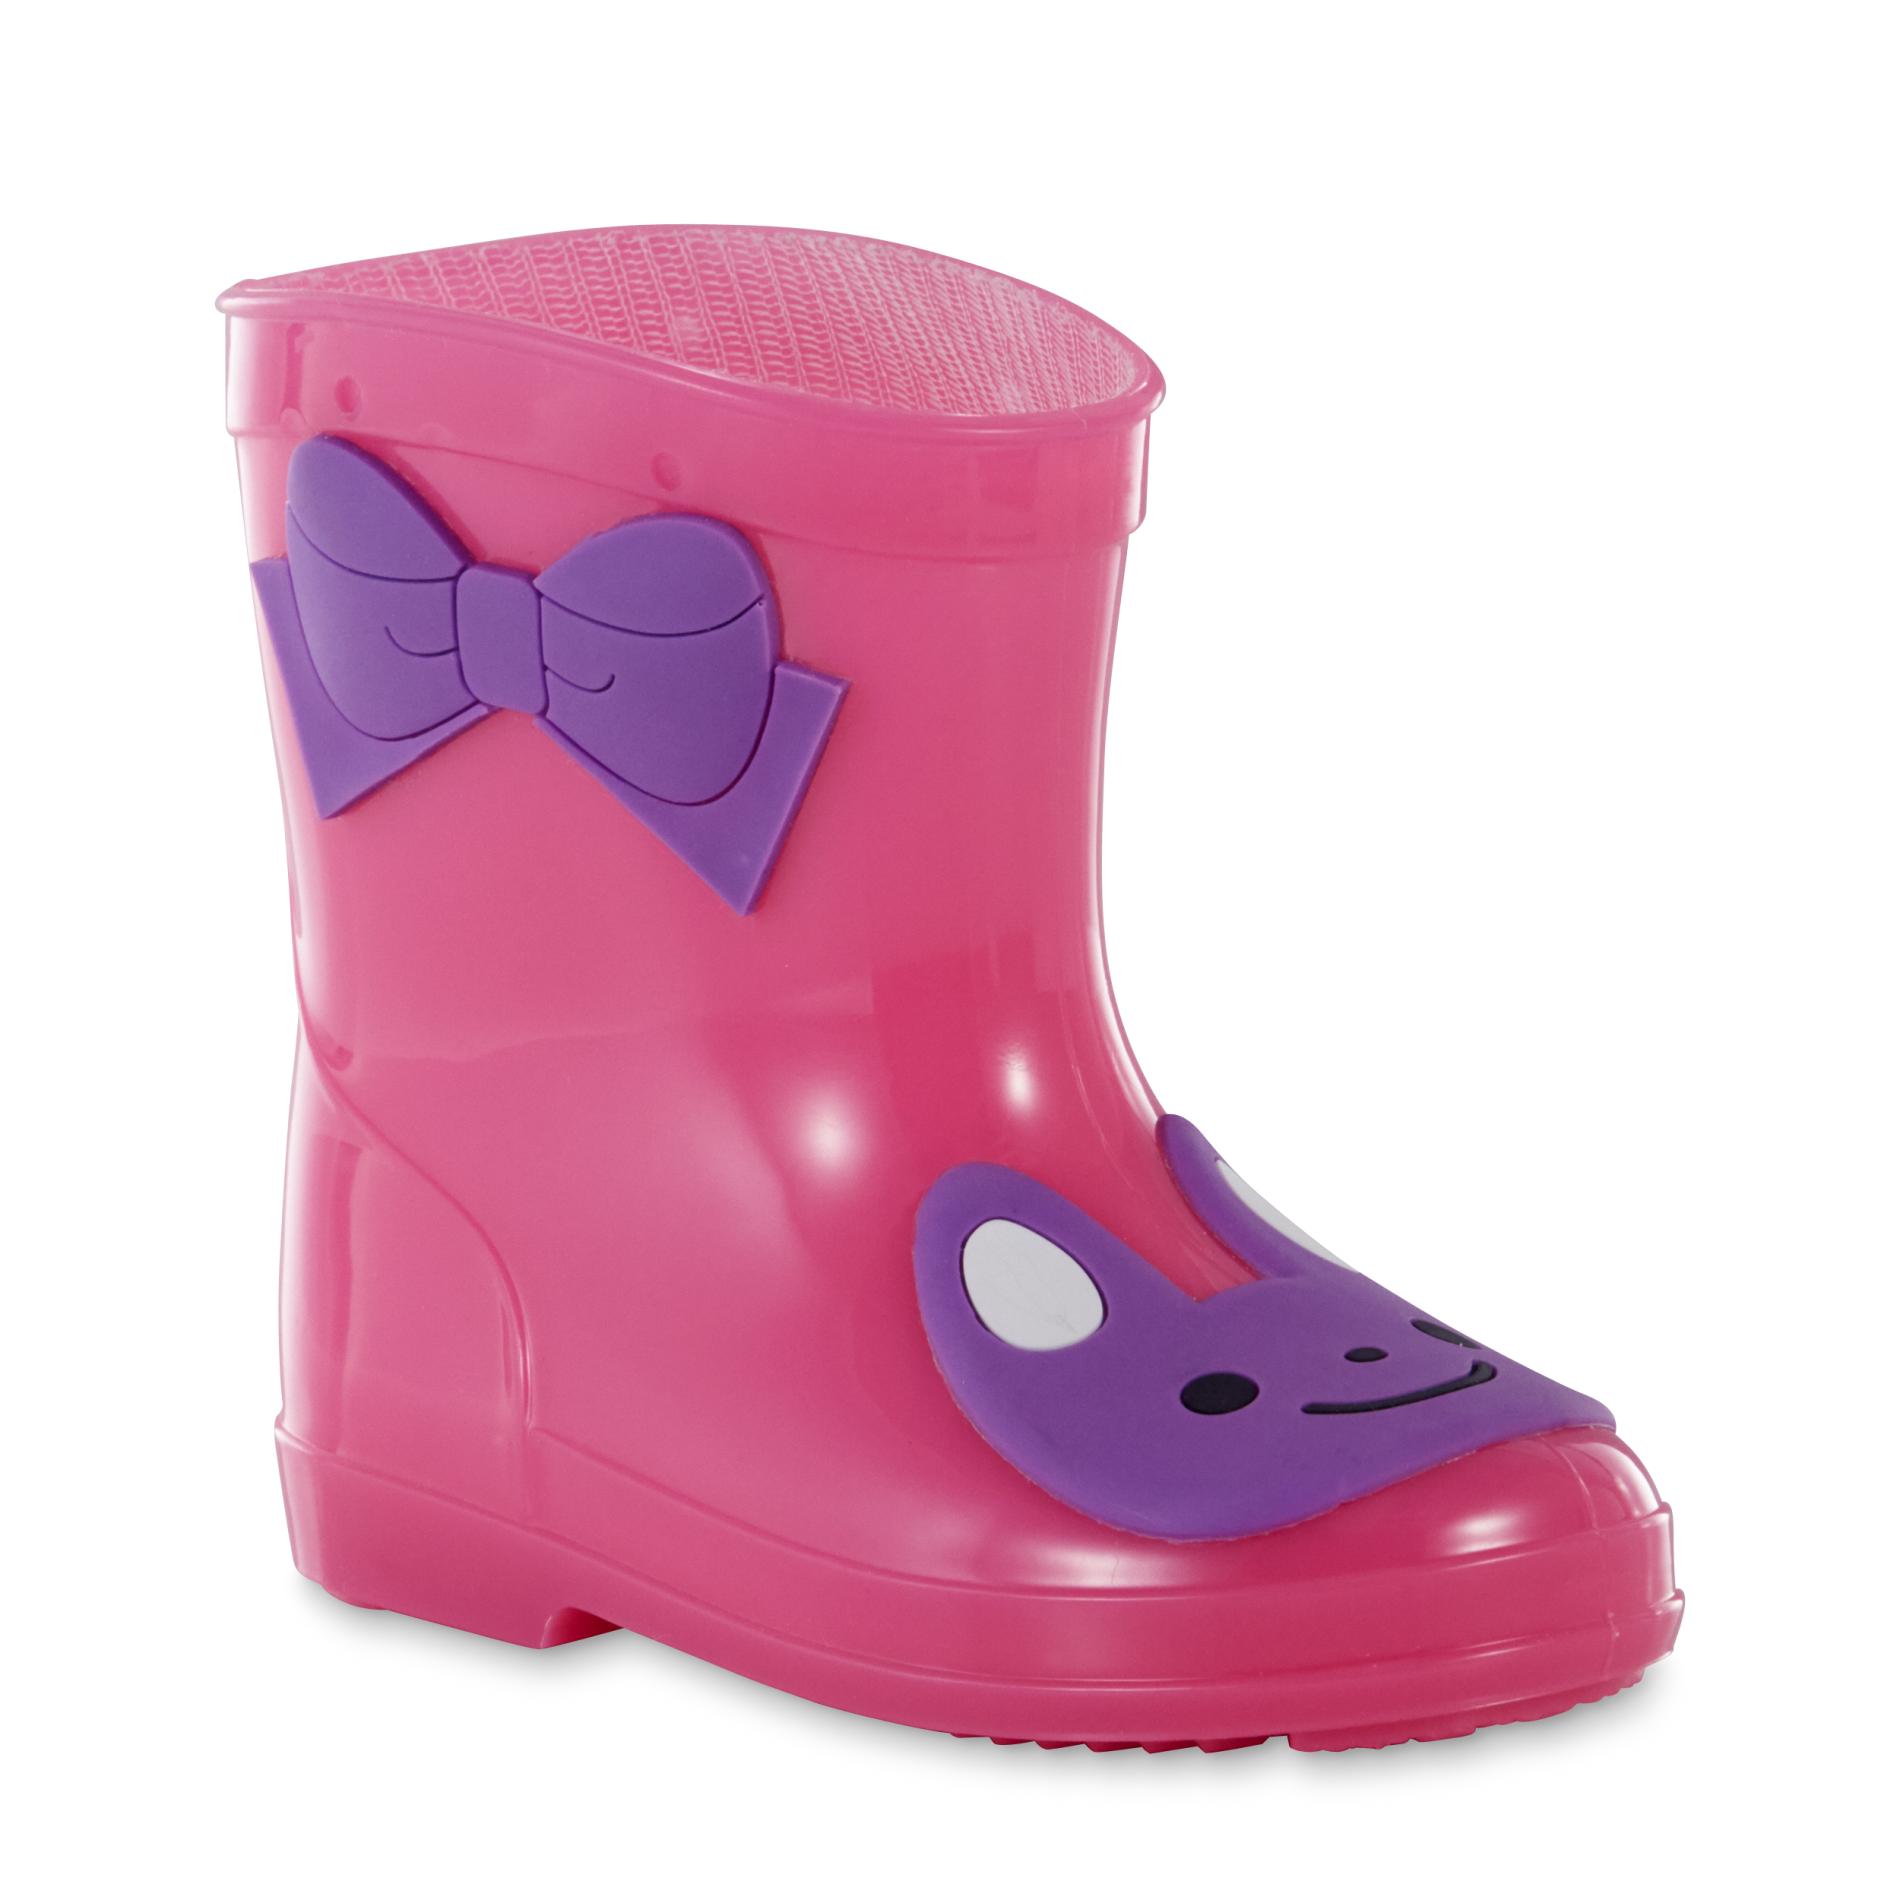 Personal Identity Toddler Girl's Pink/Bunny Rain Boot